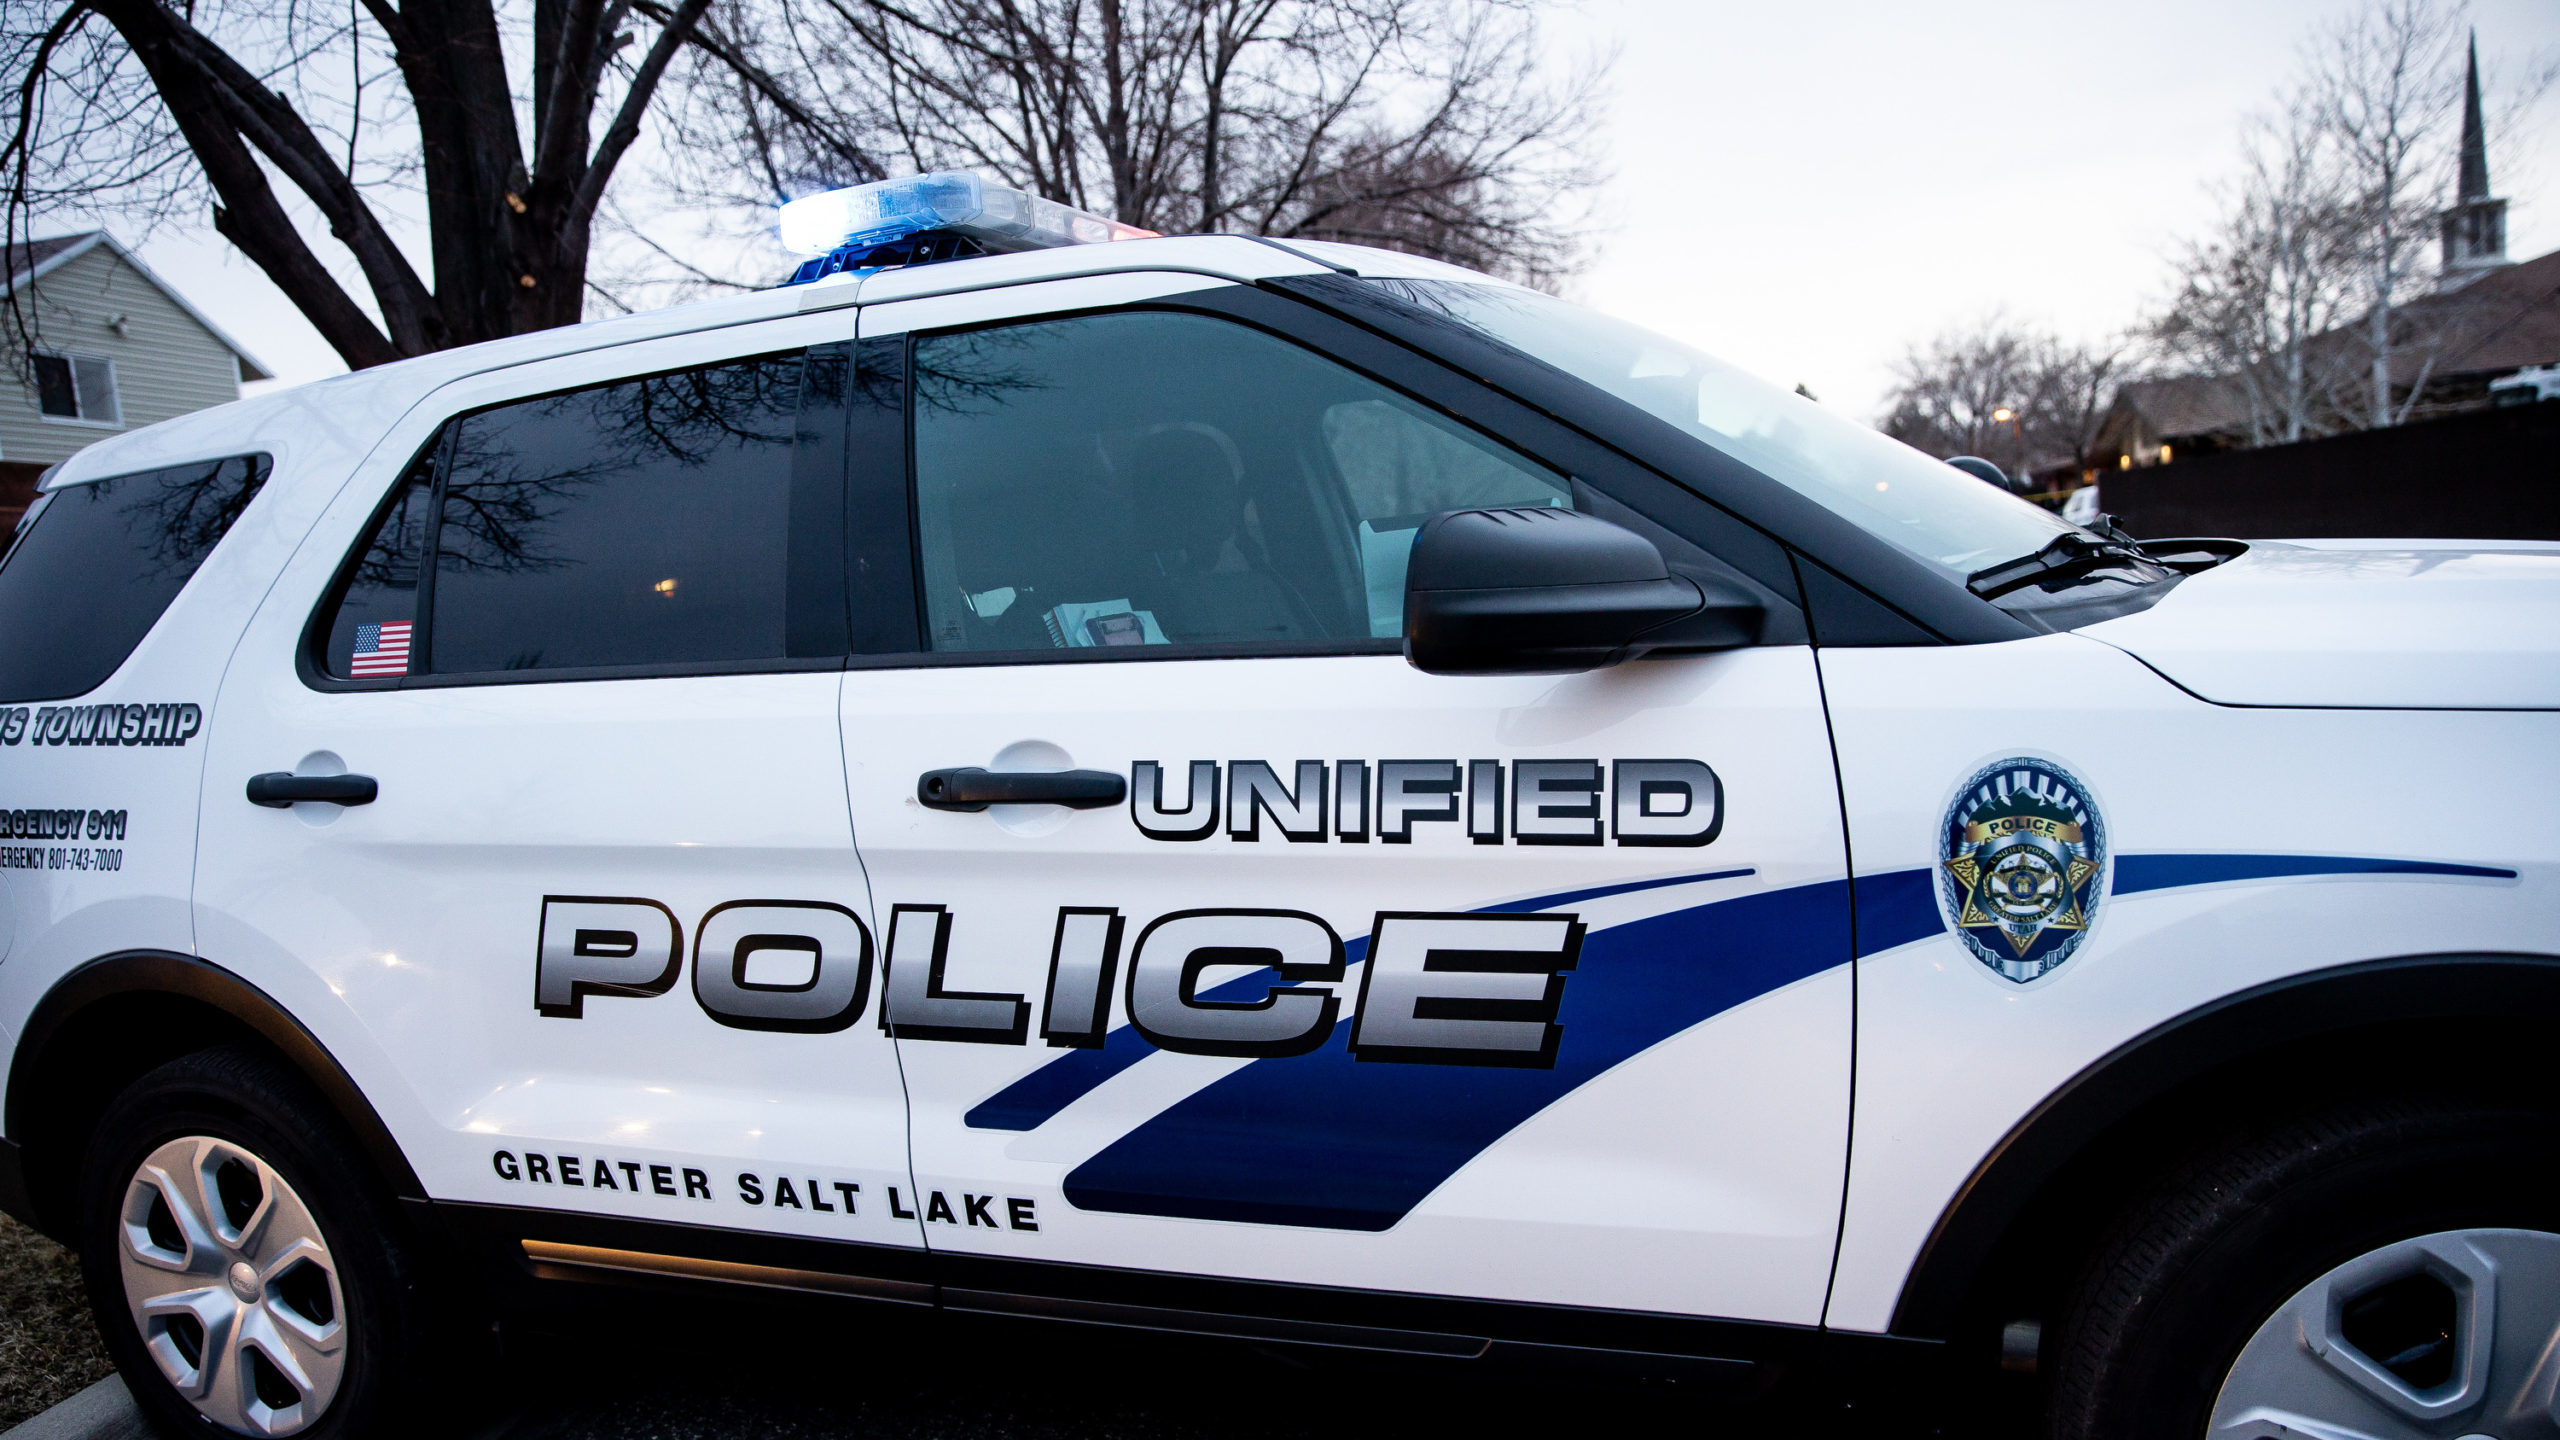 A Unified police vehicle is pictured in Kearns on Tuesday, March 9, 2021. 
Unified Police issued an...